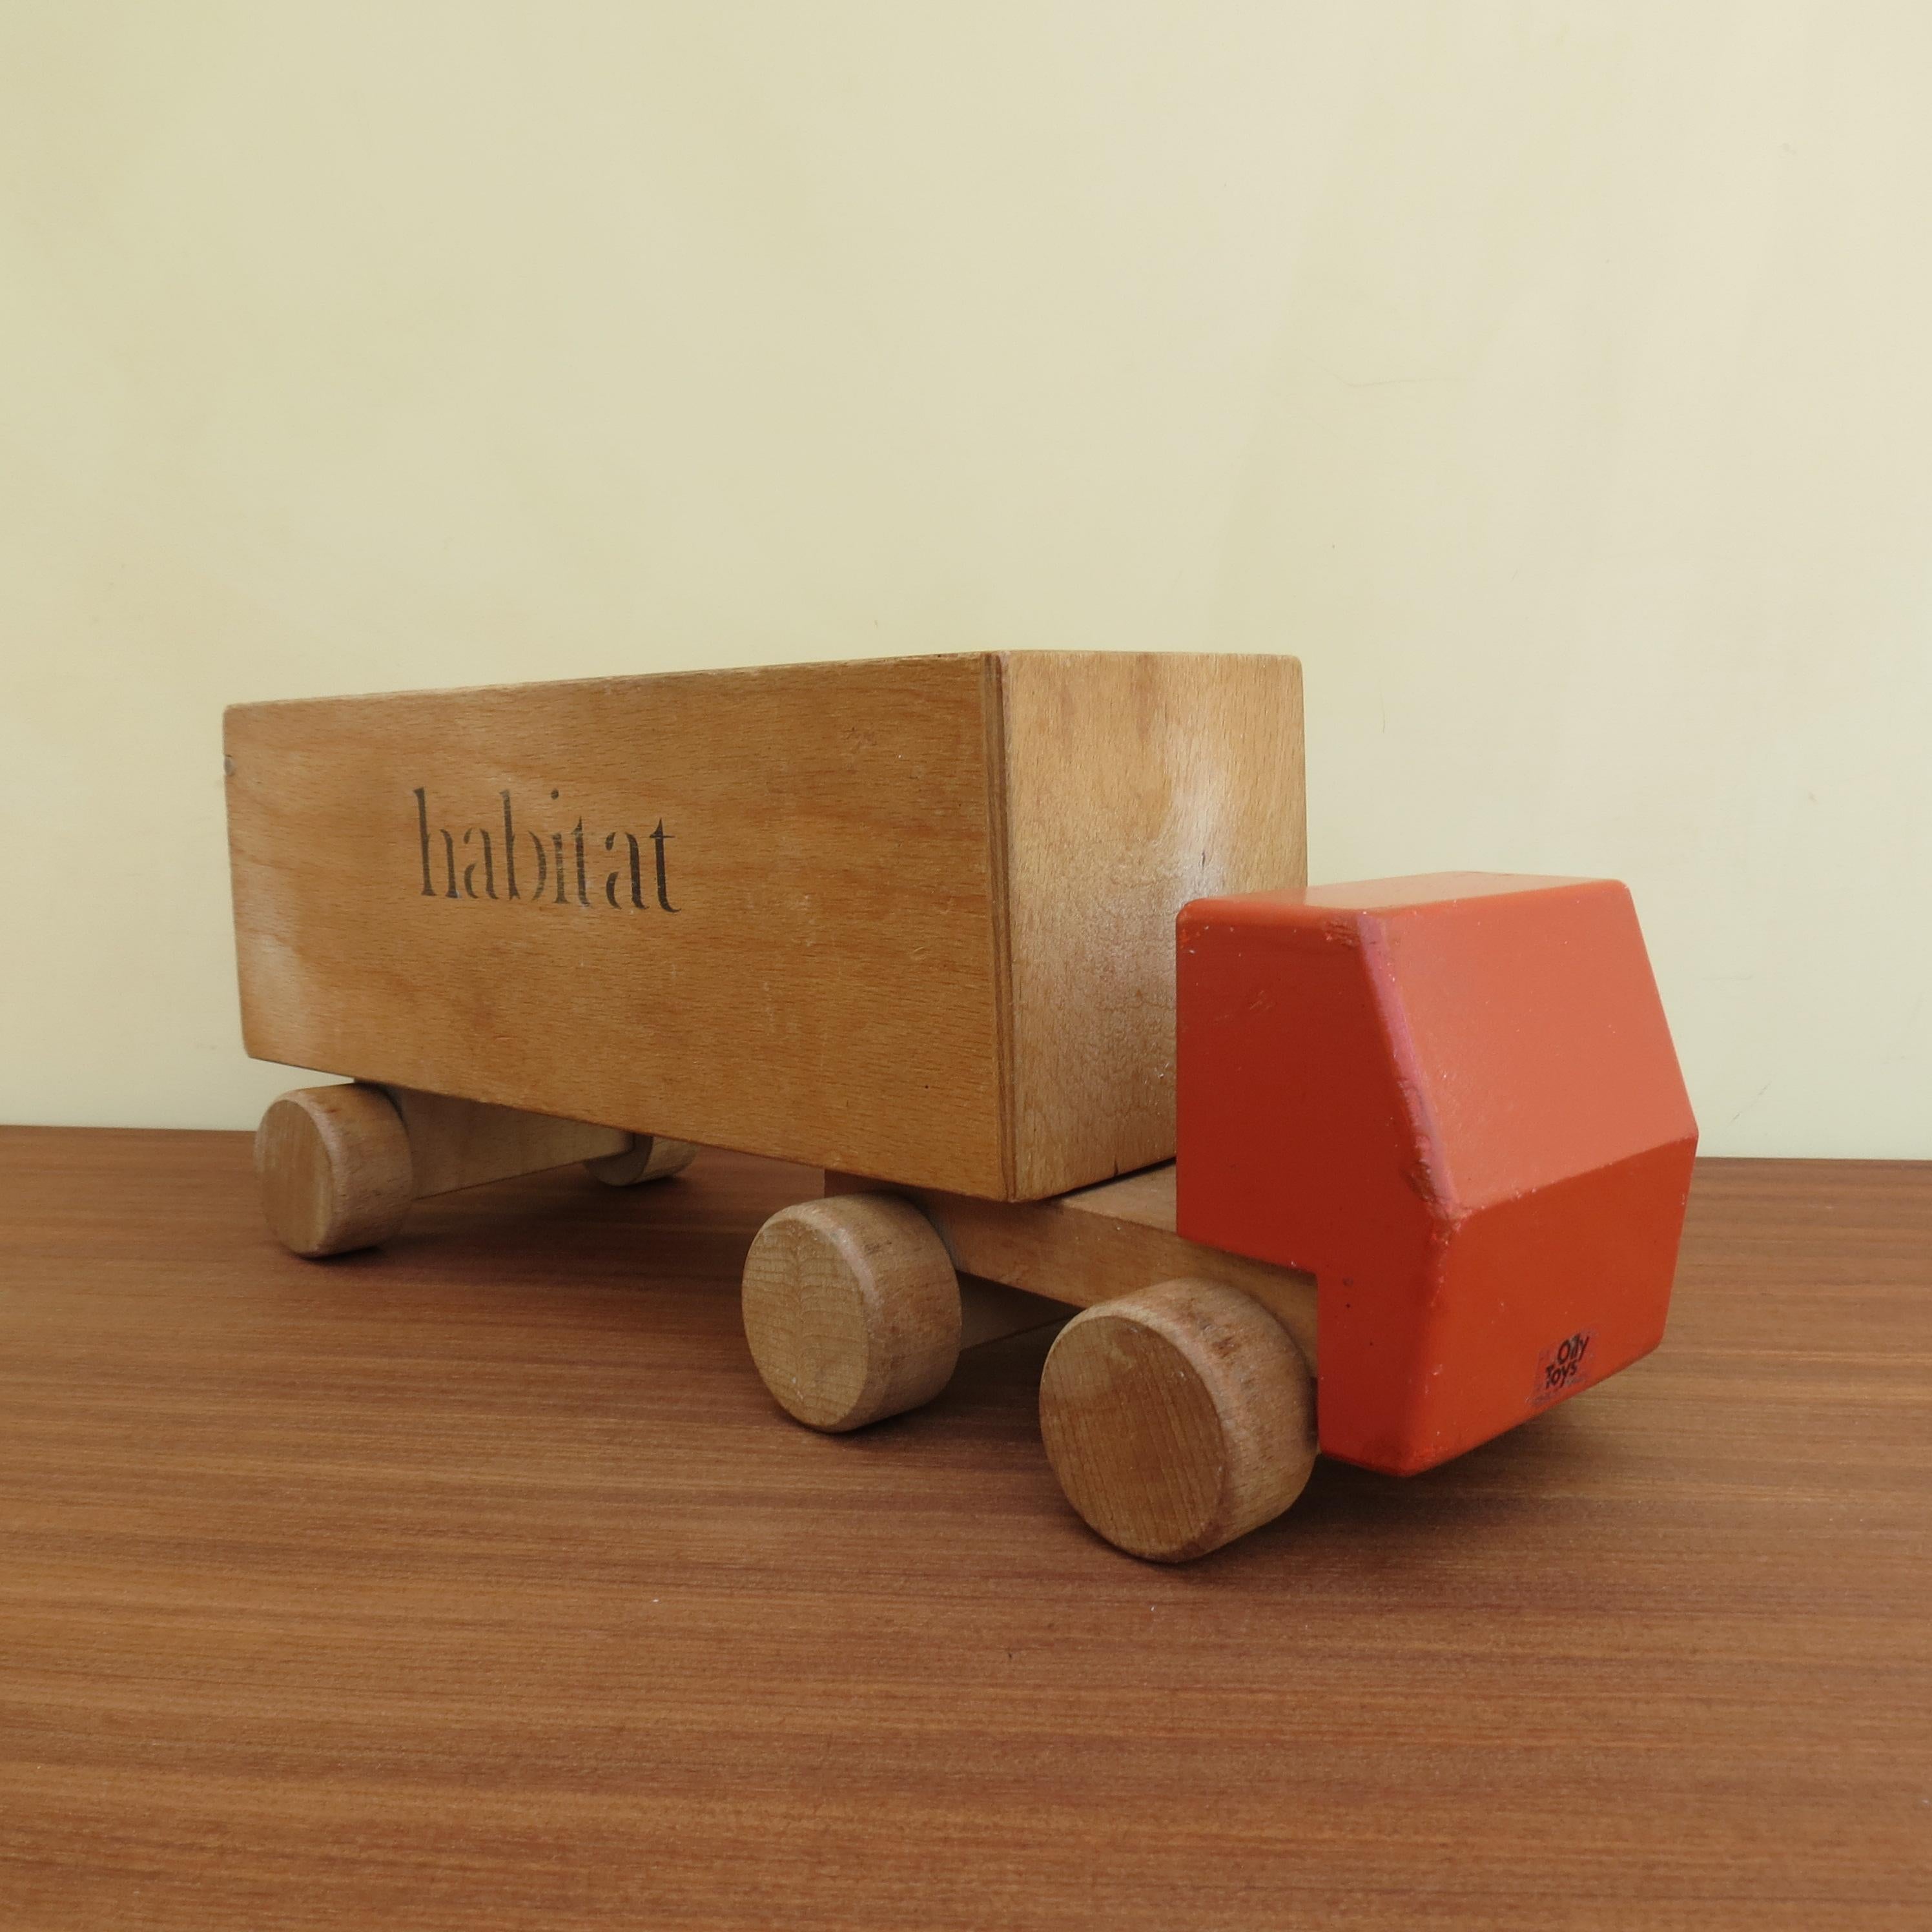 20th Century 1970s Vintage Advertising Toy Lorry for Habitat Wooden Toy Lorry by Ryk Heuff